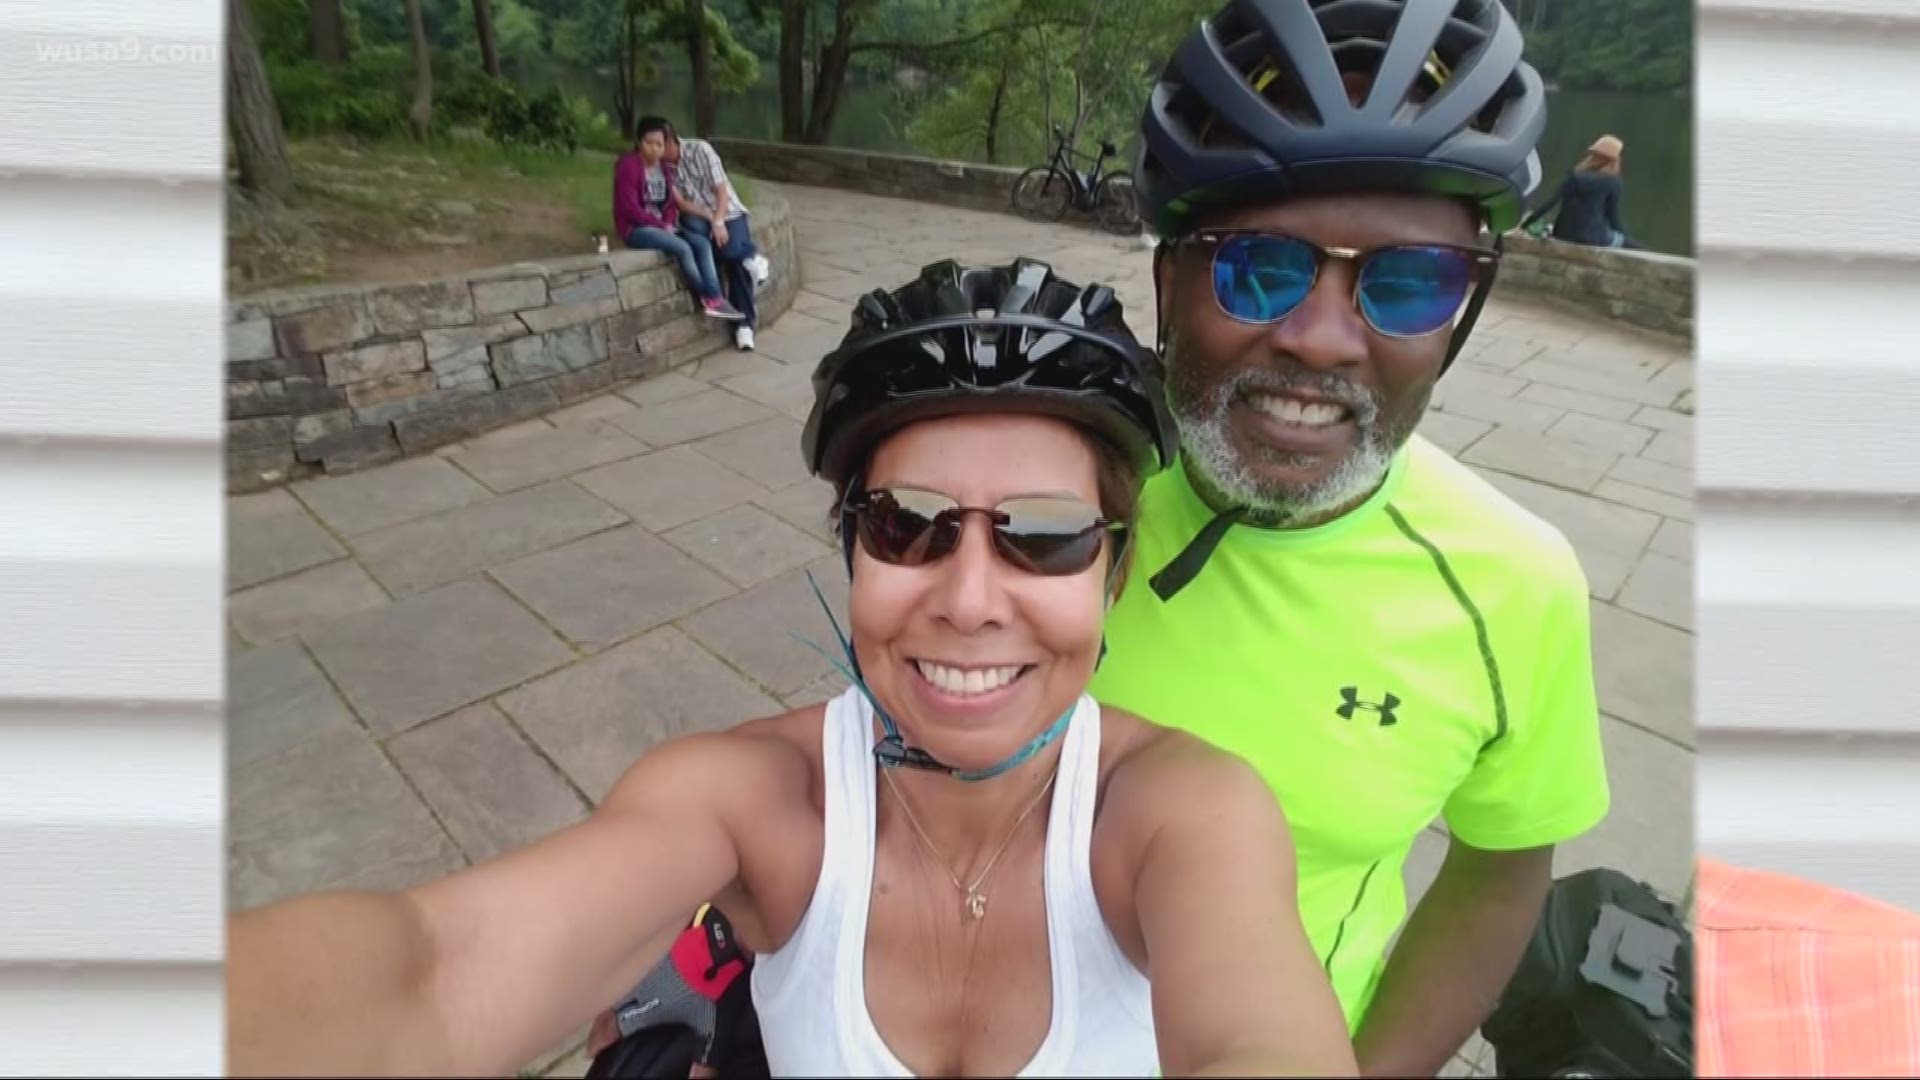 Diane Deshields died Sunday while taking part in Firefighter 50, a 62 mile charity bike ride in Frederick County.